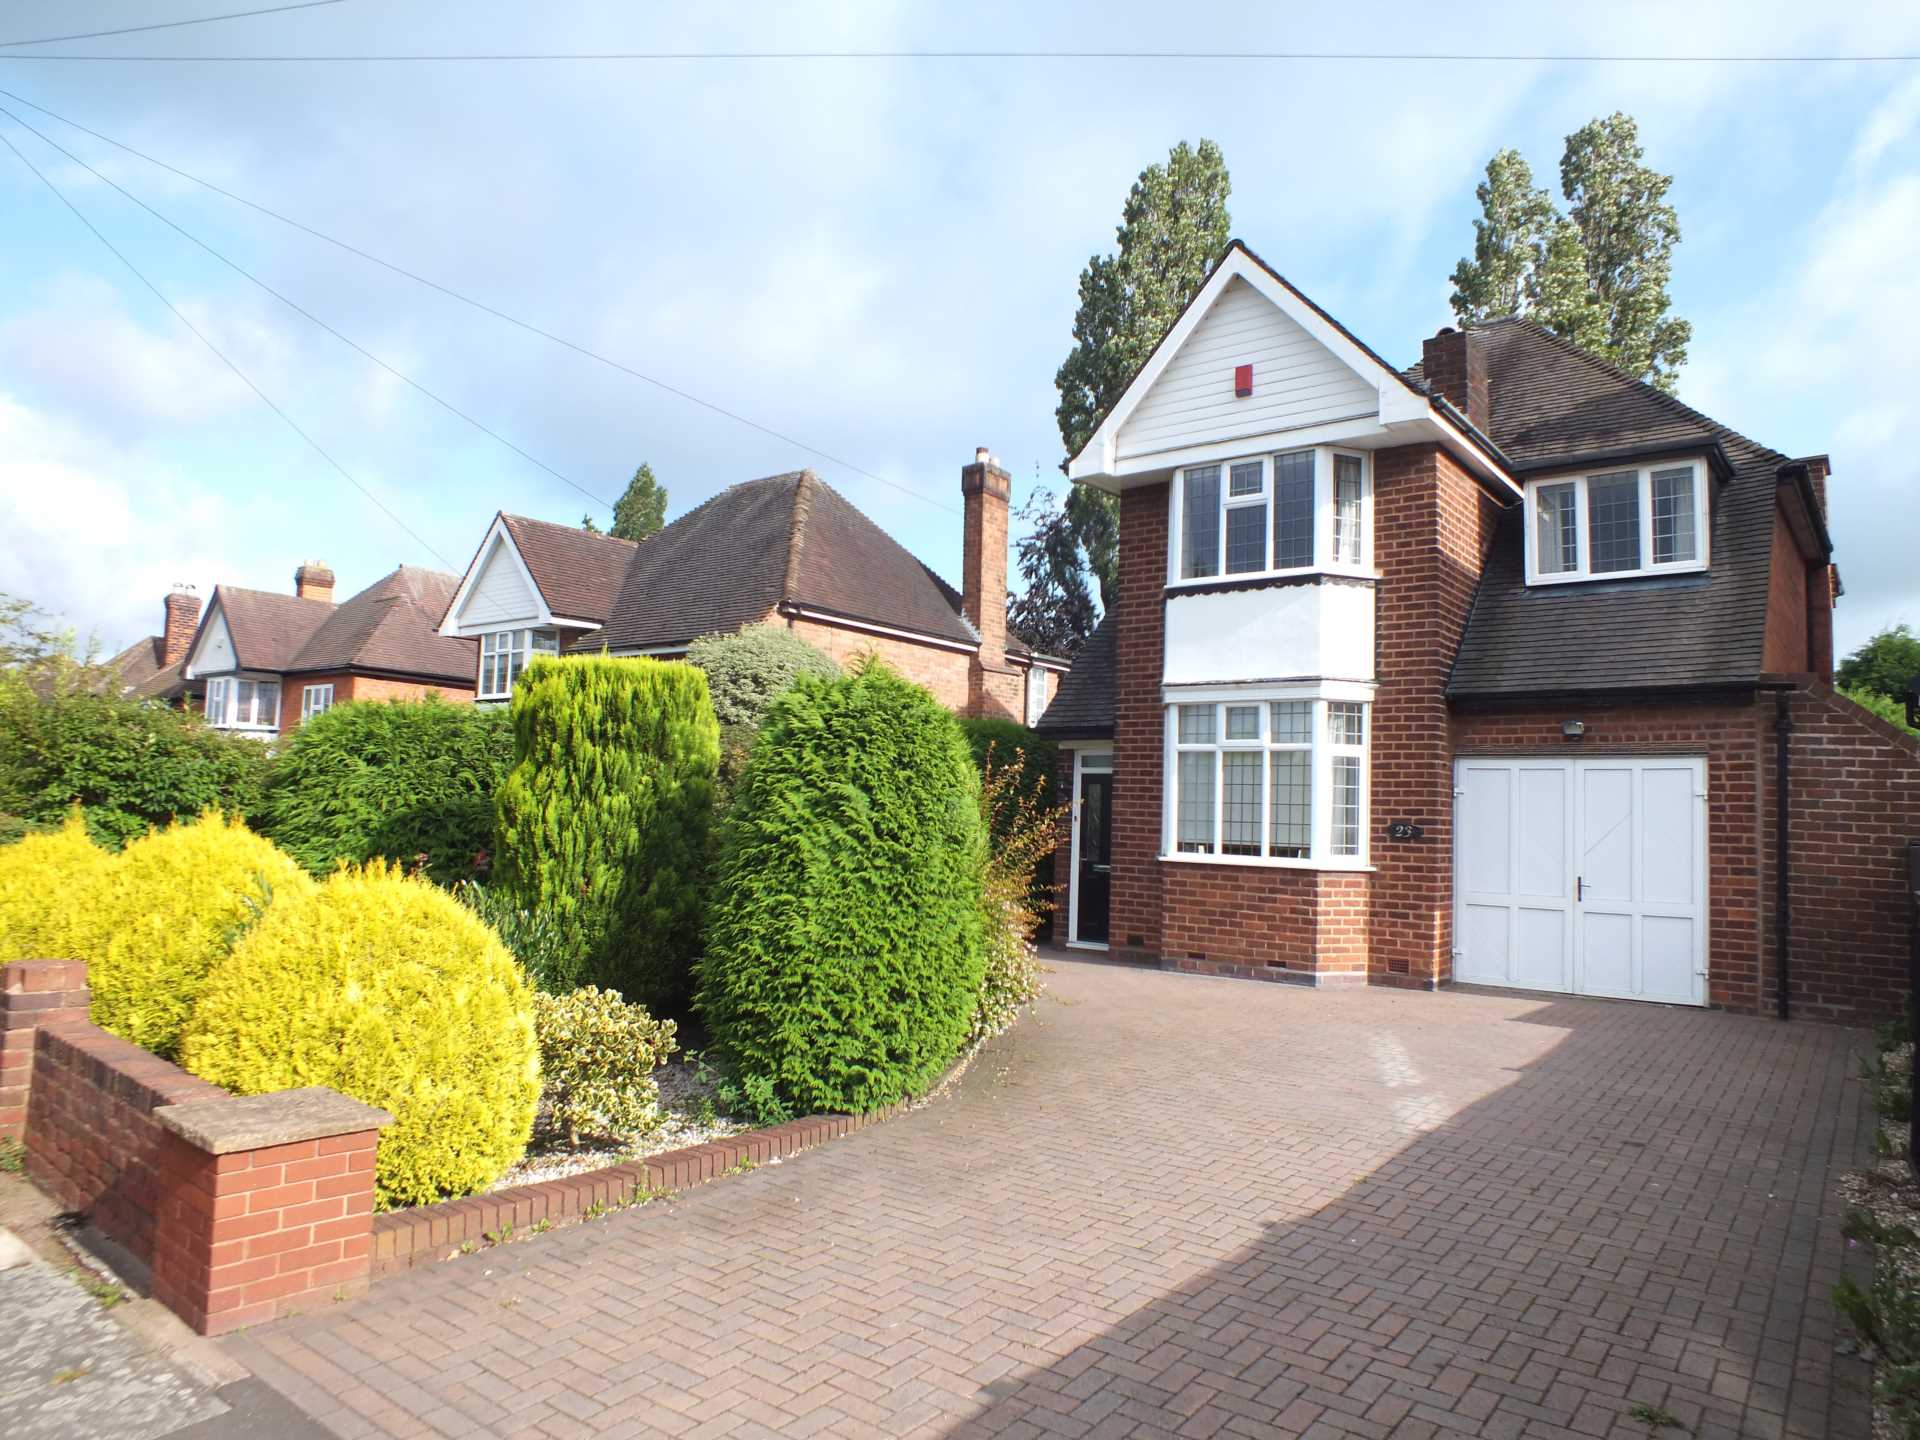 4 bed Link detached house for rent in Sutton Coldfield. From Bergason Estate Agents